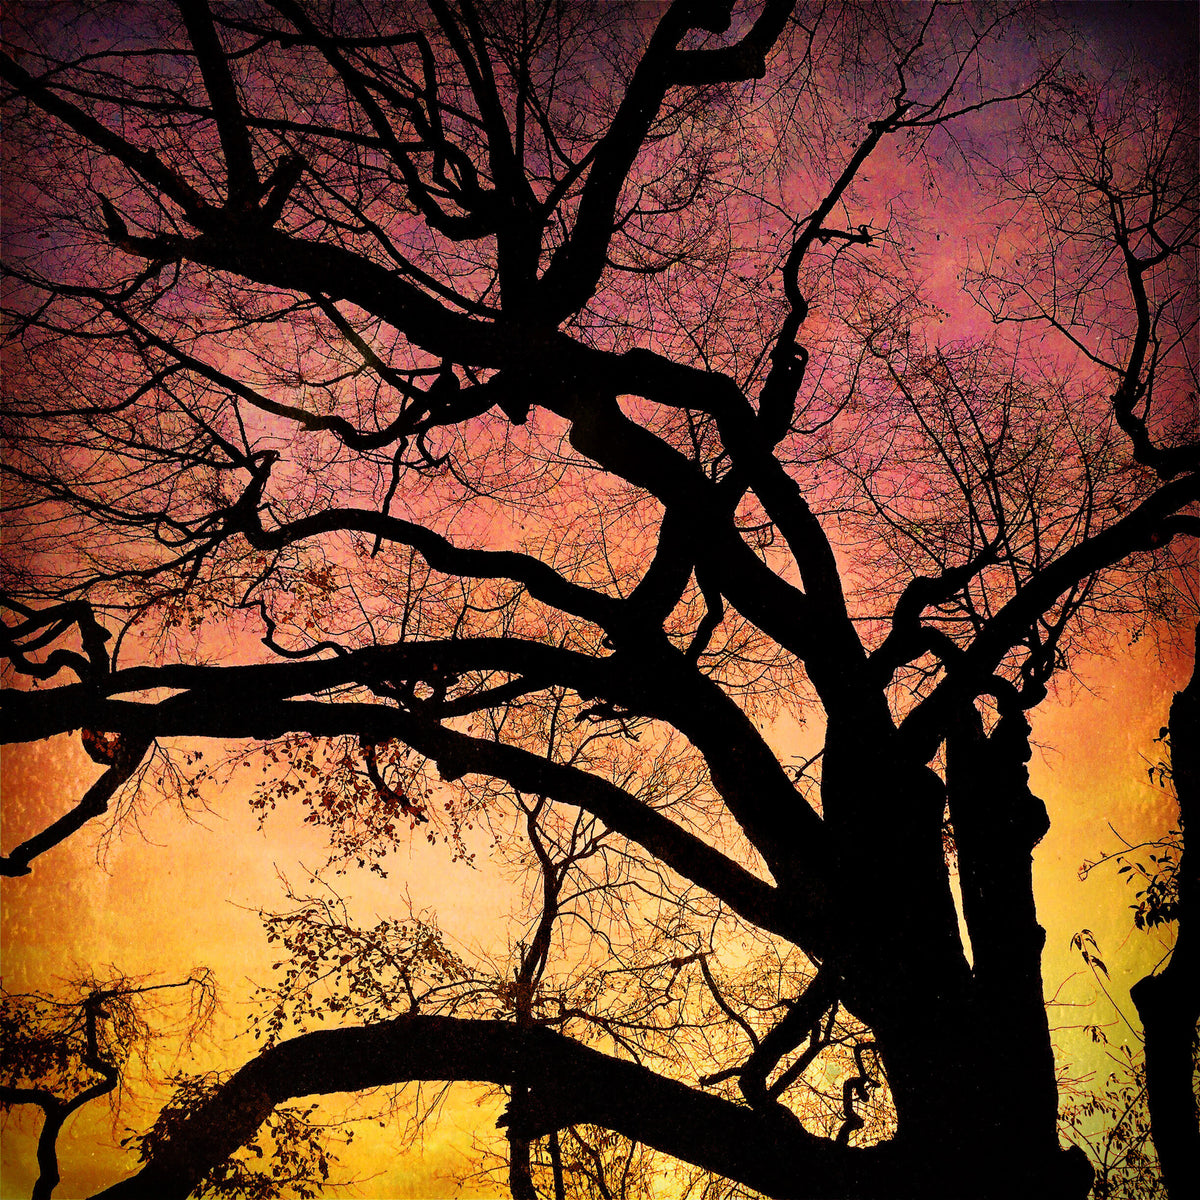 A tree is silhouetted against a pink and orange sky. - Dark orange